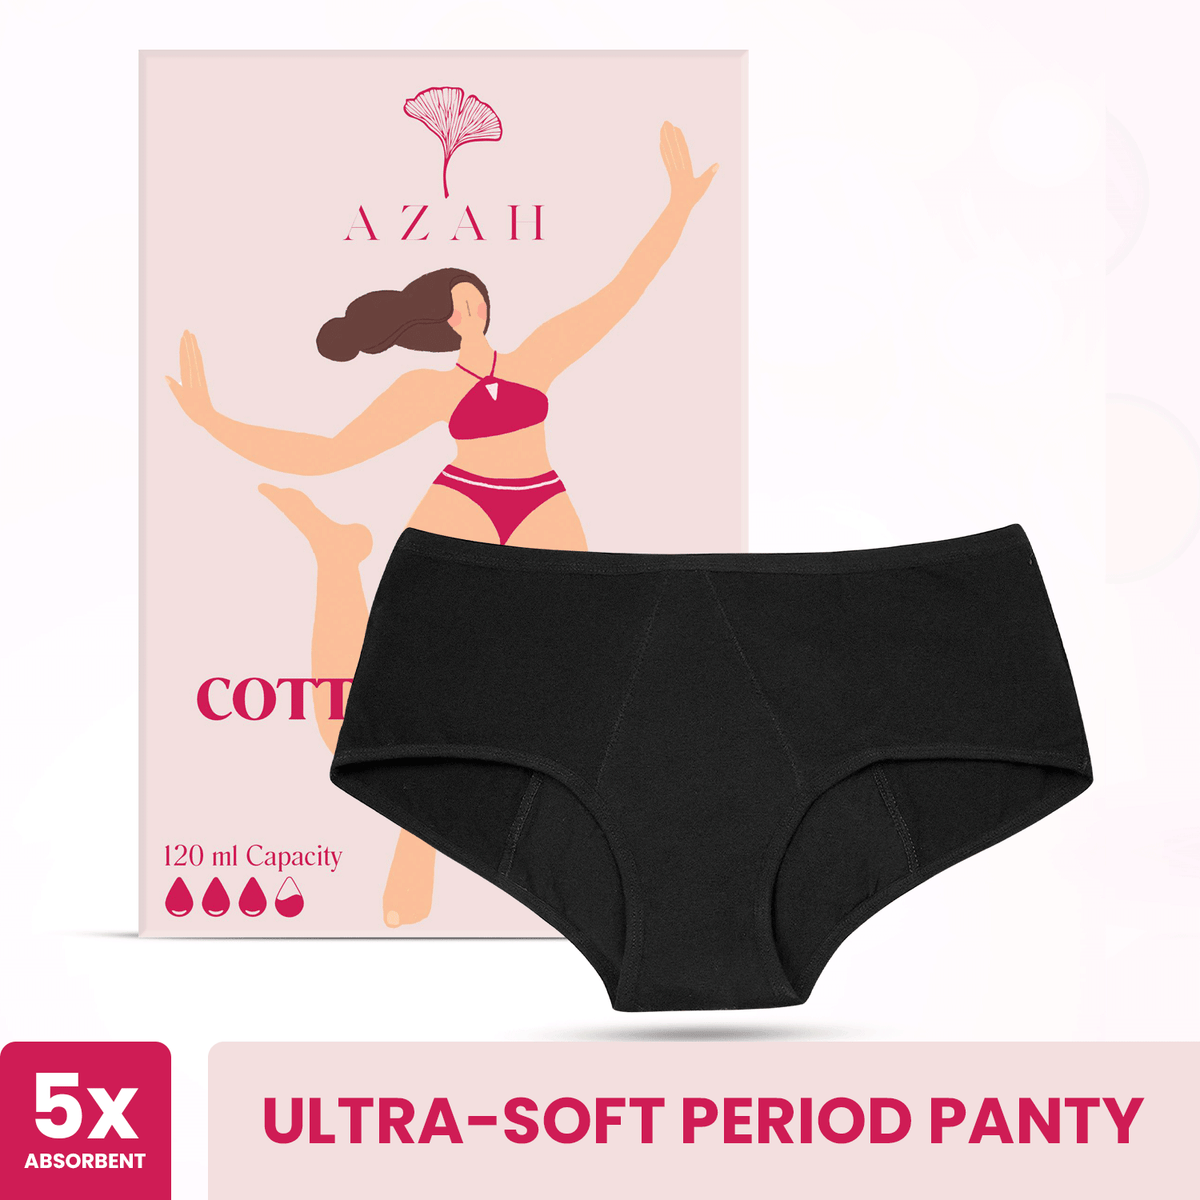 Why Sanitary Panties Are The New Heroes You Need, menstration, panties,  period and more